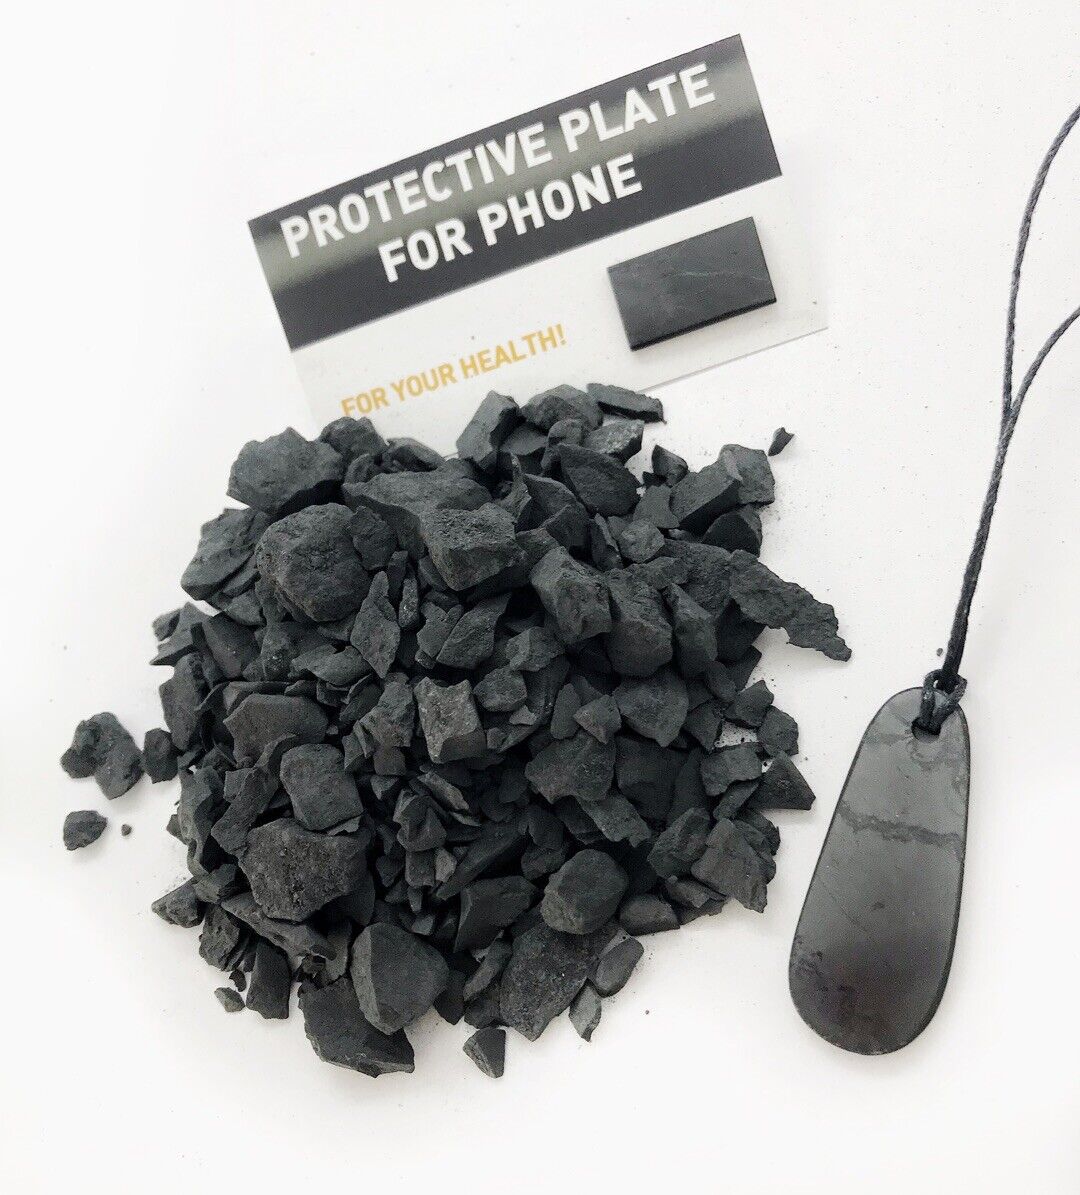 Shungite rough stones for water 1 lb 450g +2 GIFTs detox